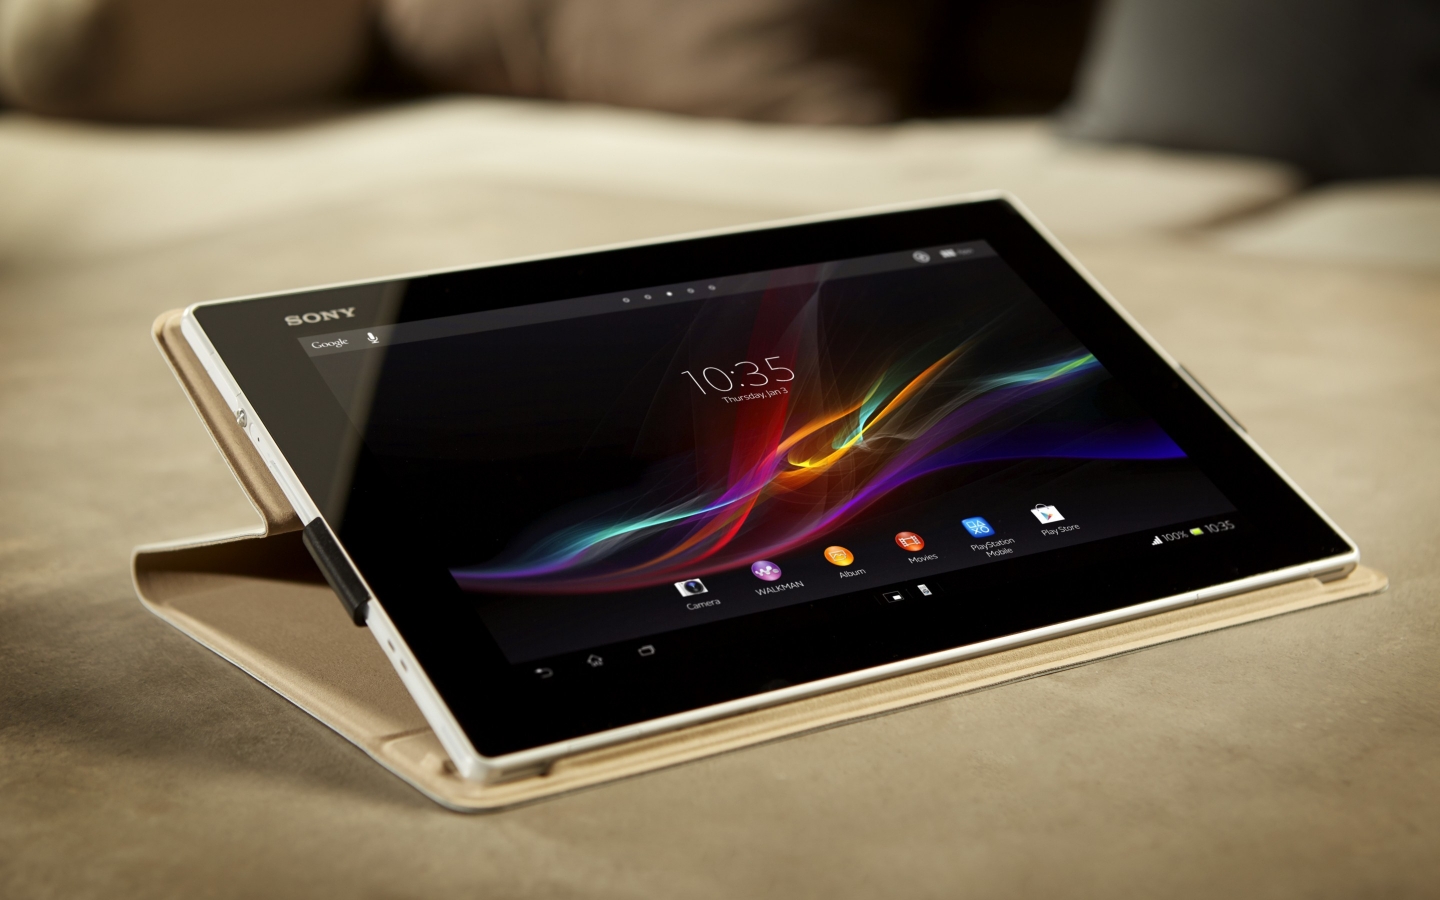 Sony Xperia Tablet Z for 1440 x 900 widescreen resolution